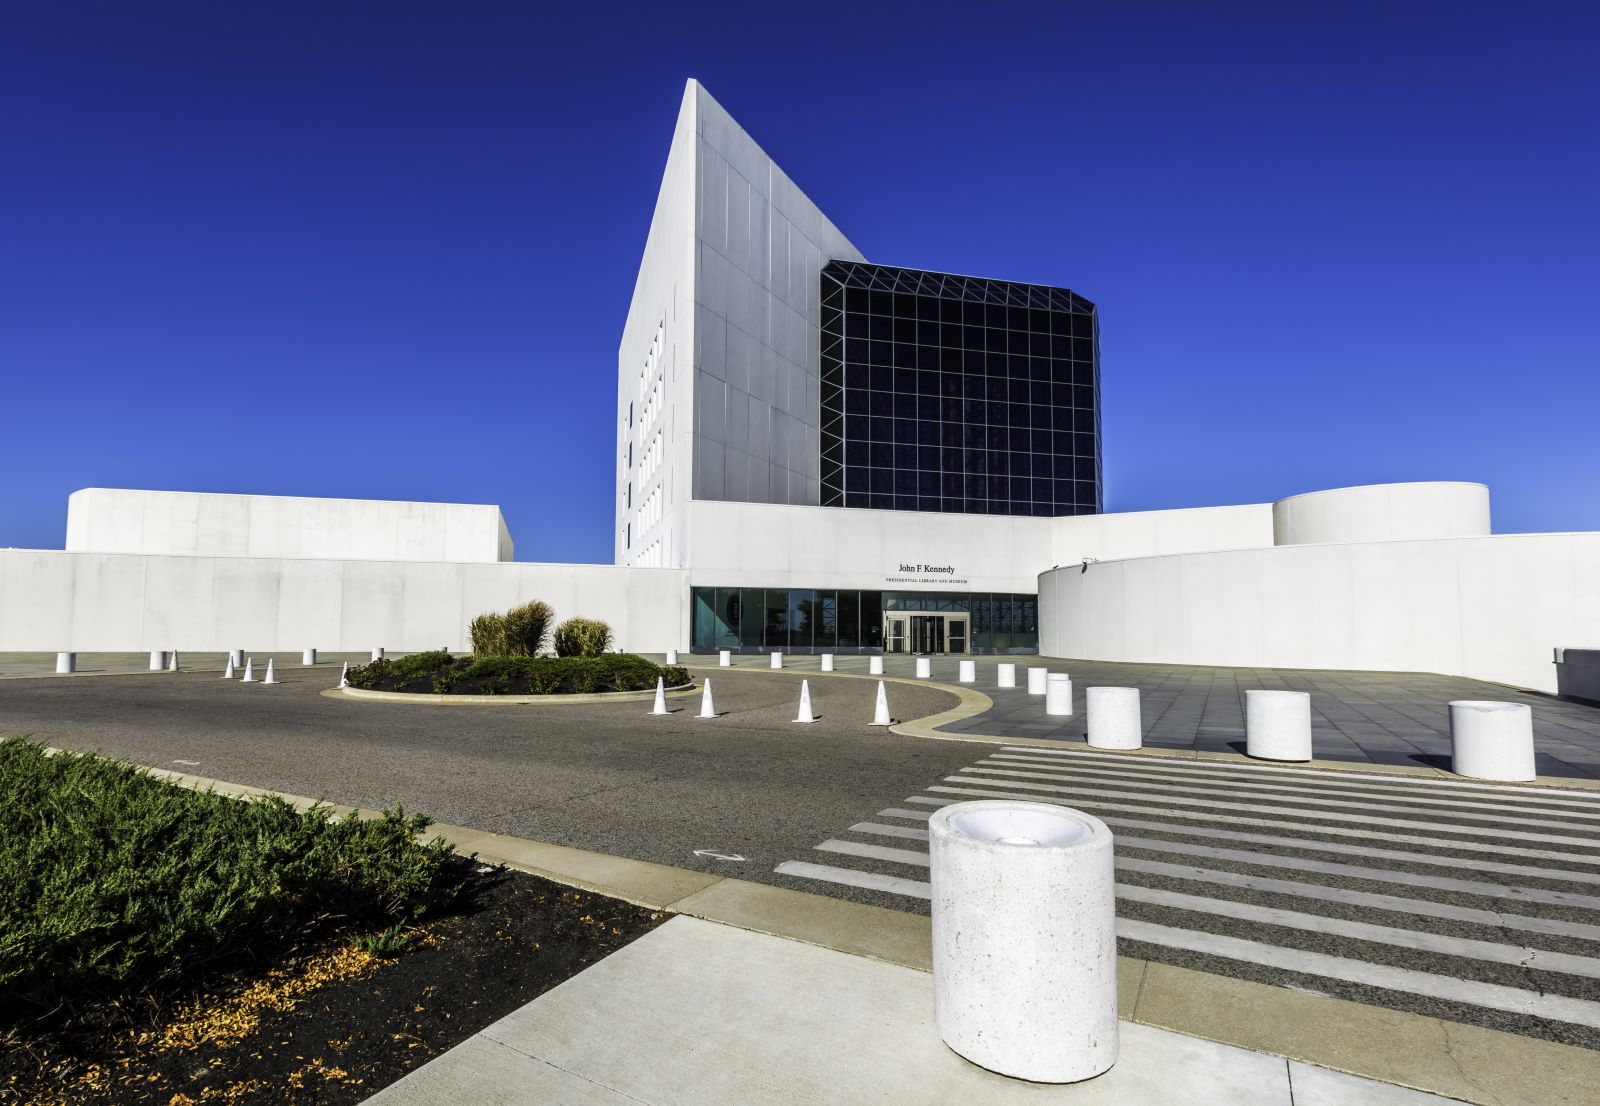 <p class="wp-caption-text">Image Credit: Shutterstock / Marcio Jose Bastos Silva</p>  <p>Dive into the life and legacy of JFK at his presidential library and museum in Boston. The building itself is an architectural gem with stunning views of the city.</p>